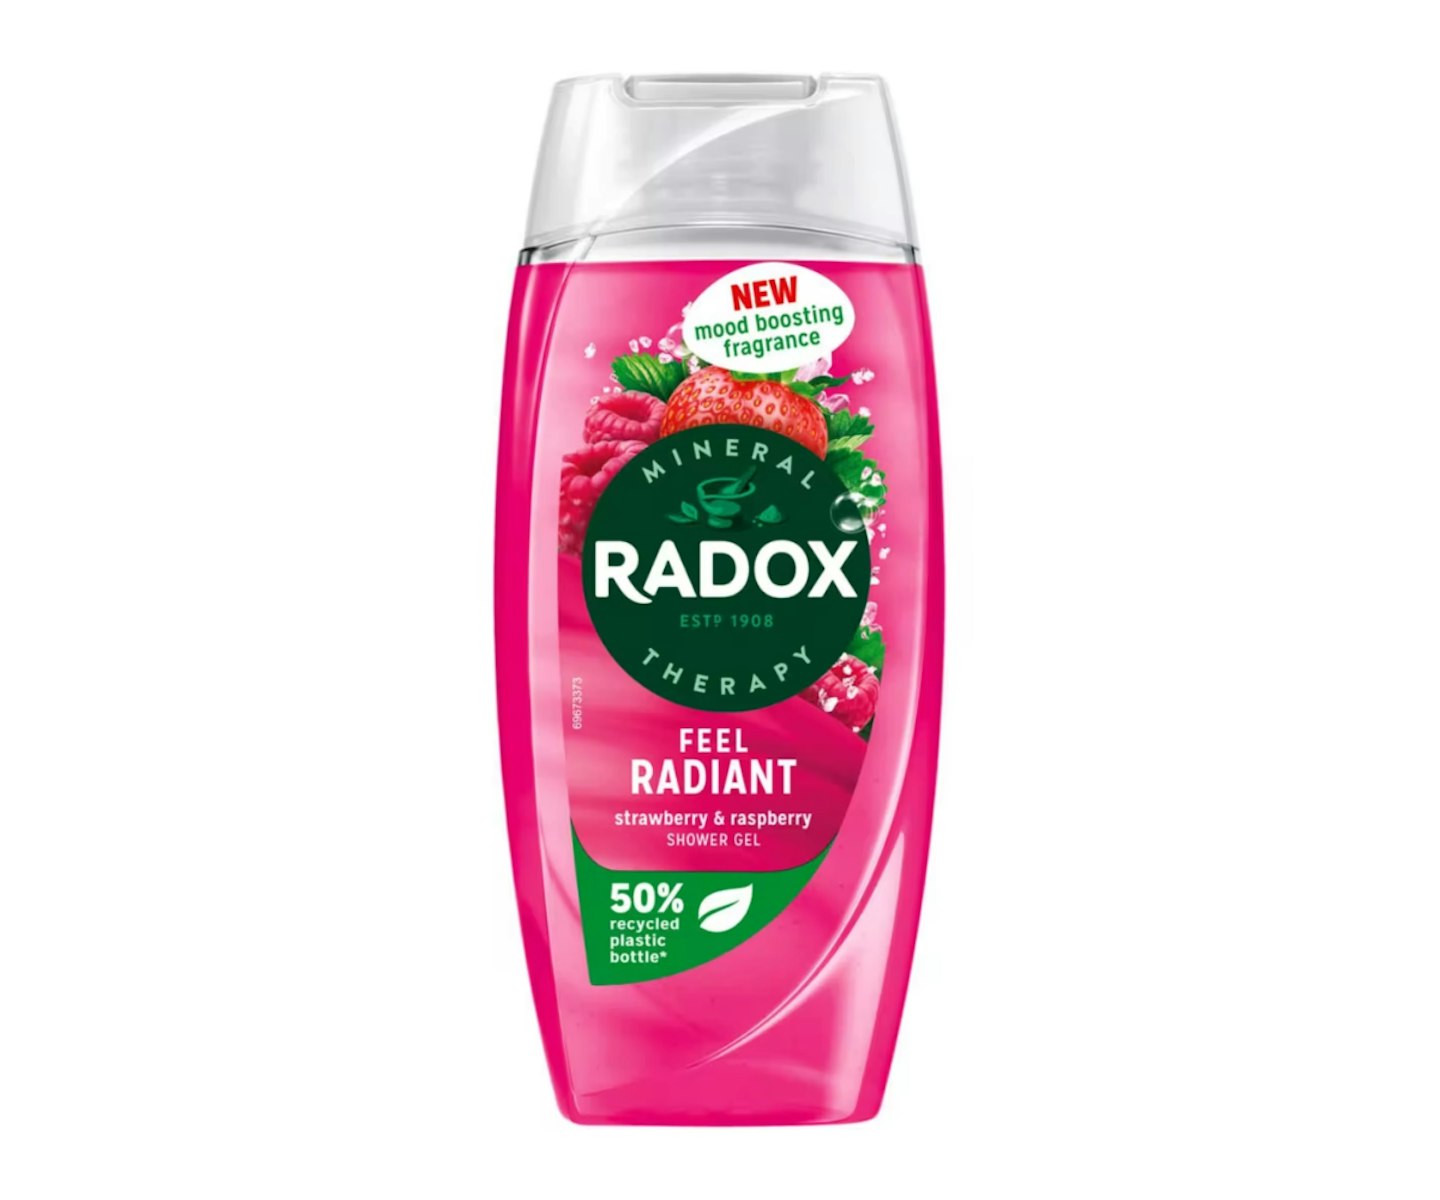  offer Radox Mineral Therapy Feel Radiant Shower Gel